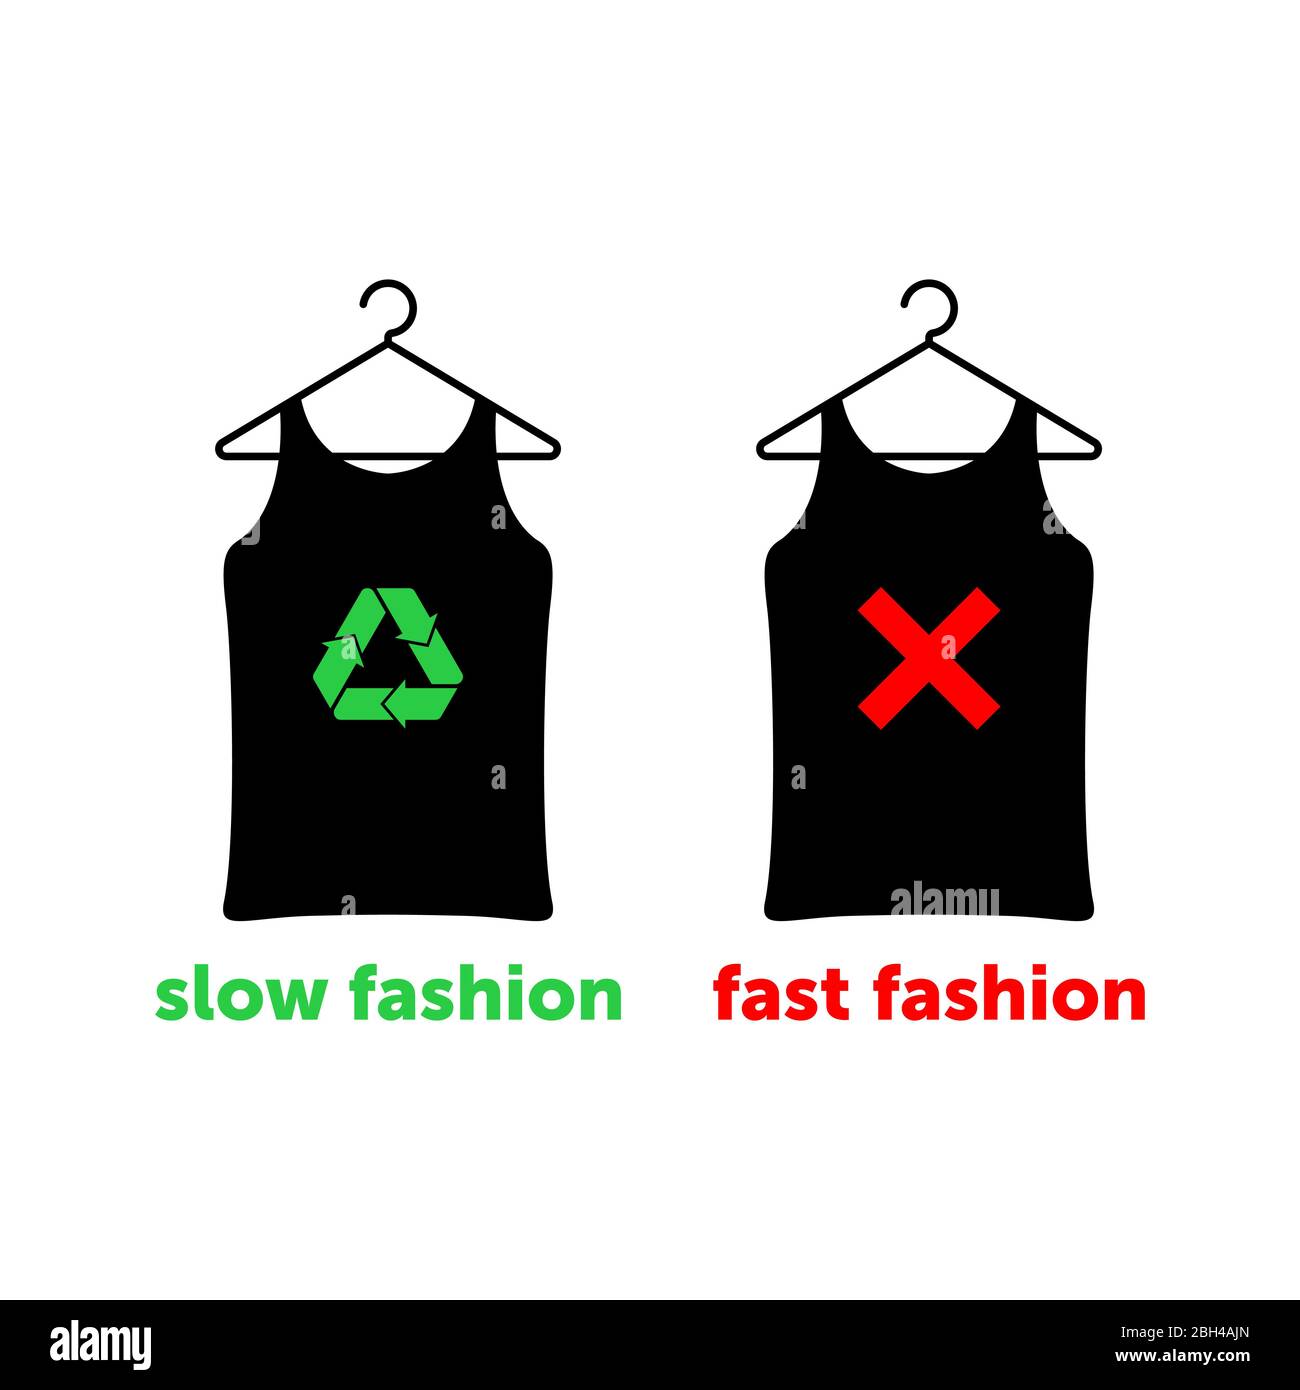 Slow fashion is the right choice to save earth. Two t-shirts on hangers with red cross and green recycle sign. Vector illustration. Stock Vector